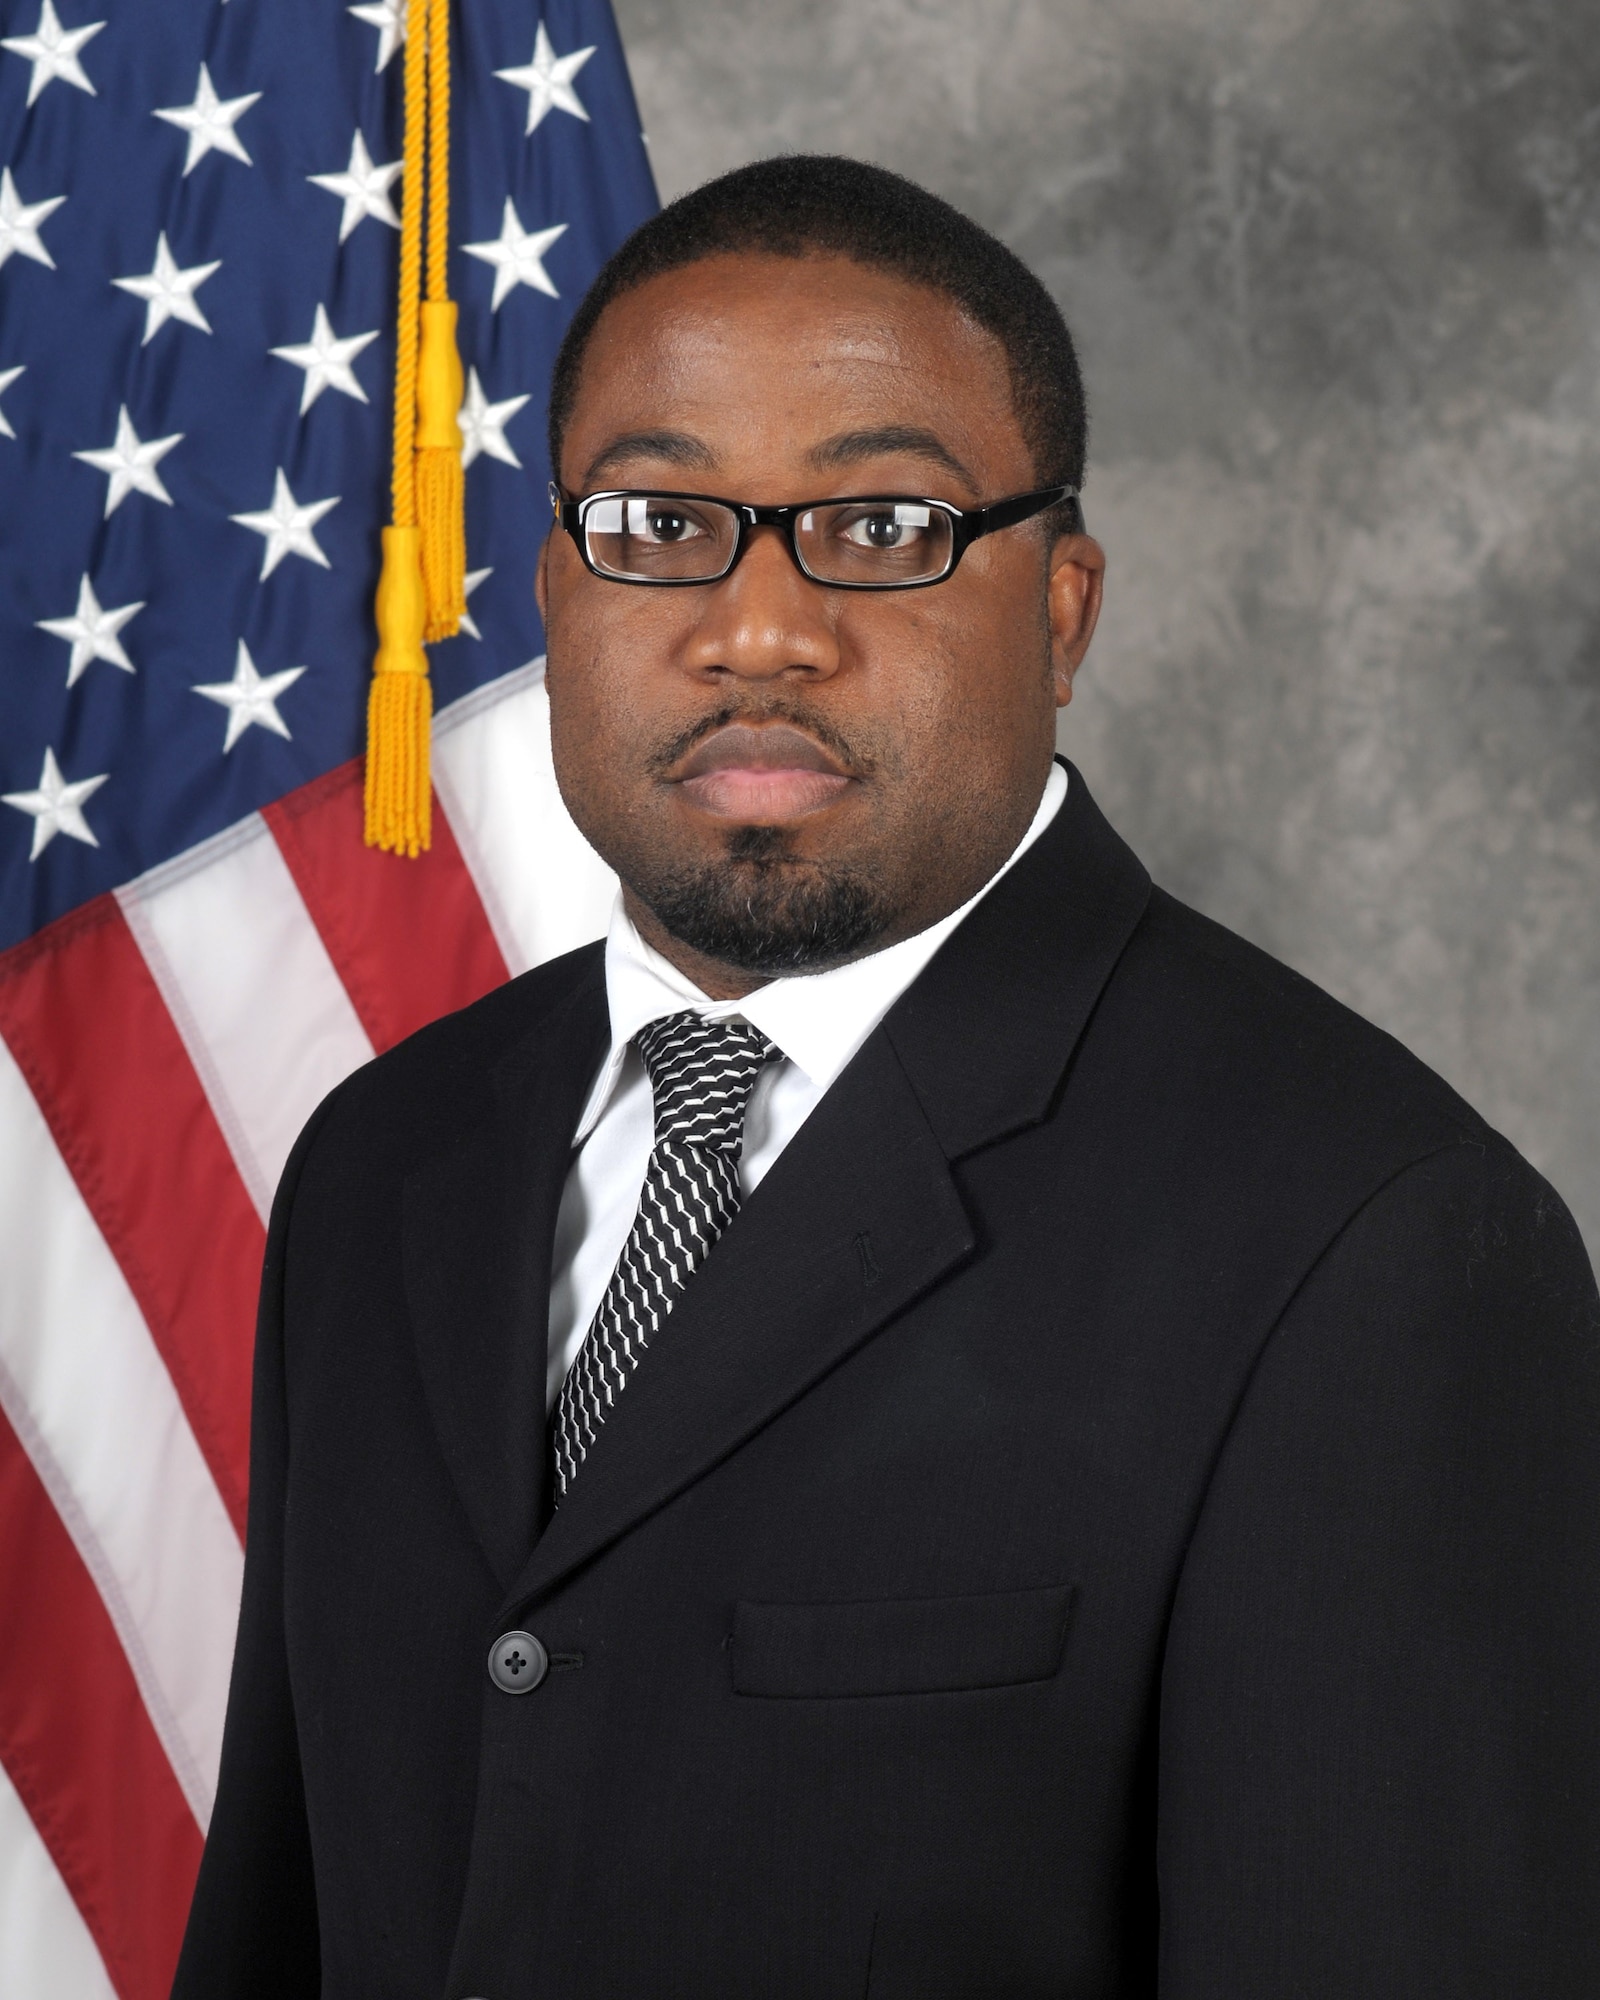 Dr. Keith L. Hardiman, Director of Information Management for the Office of the Administrative Assistant to the Secretary of the Air Force talks about his experiences being mentored throughout his career and his role as a mentor.